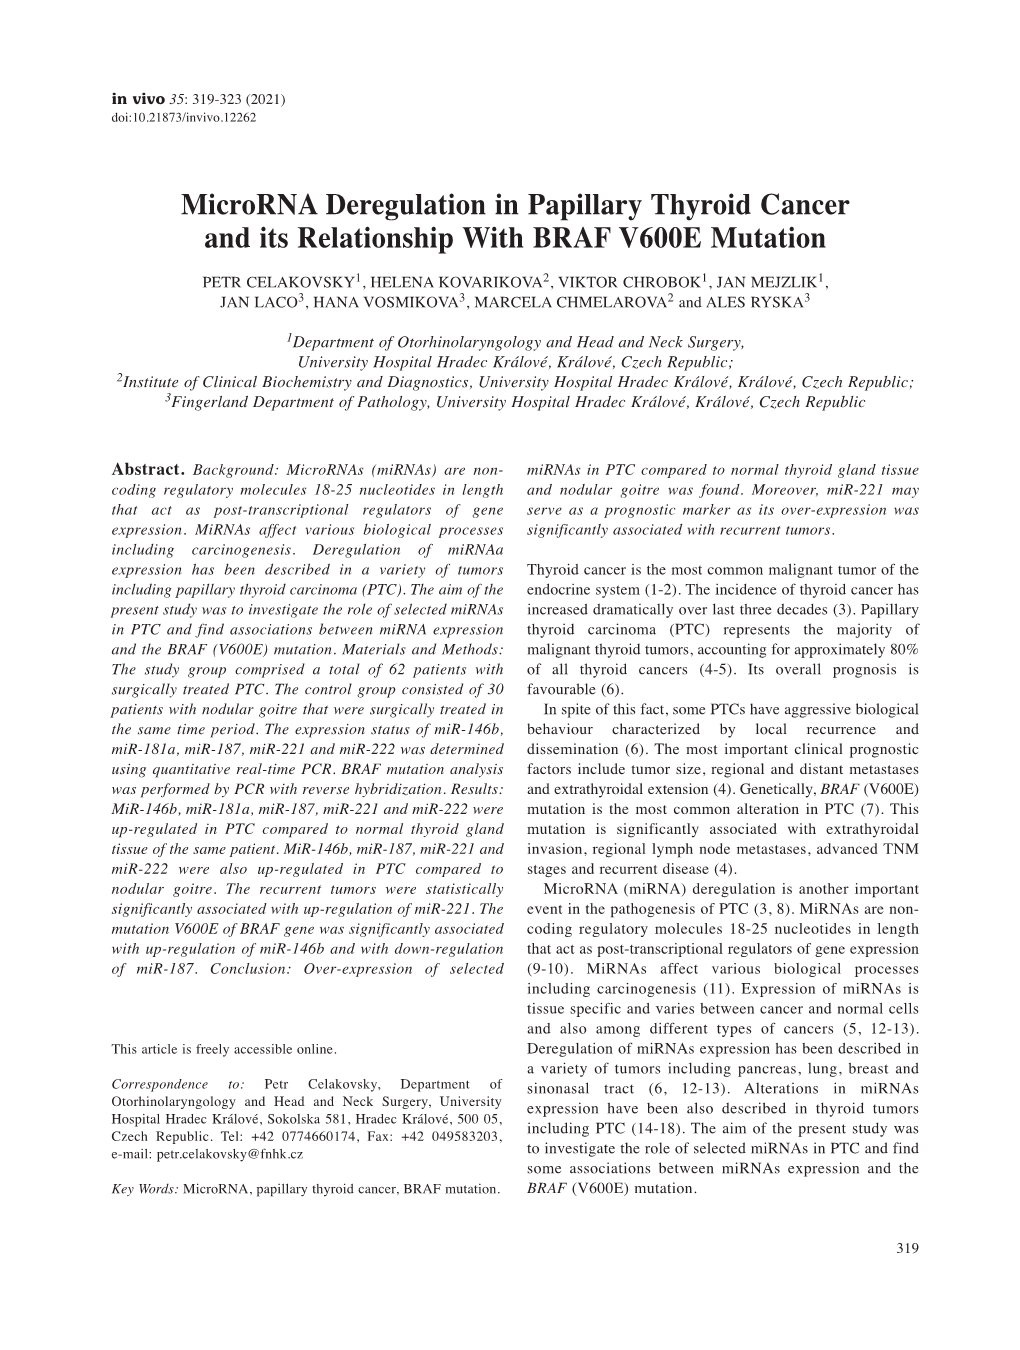 Microrna Deregulation in Papillary Thyroid Cancer and Its